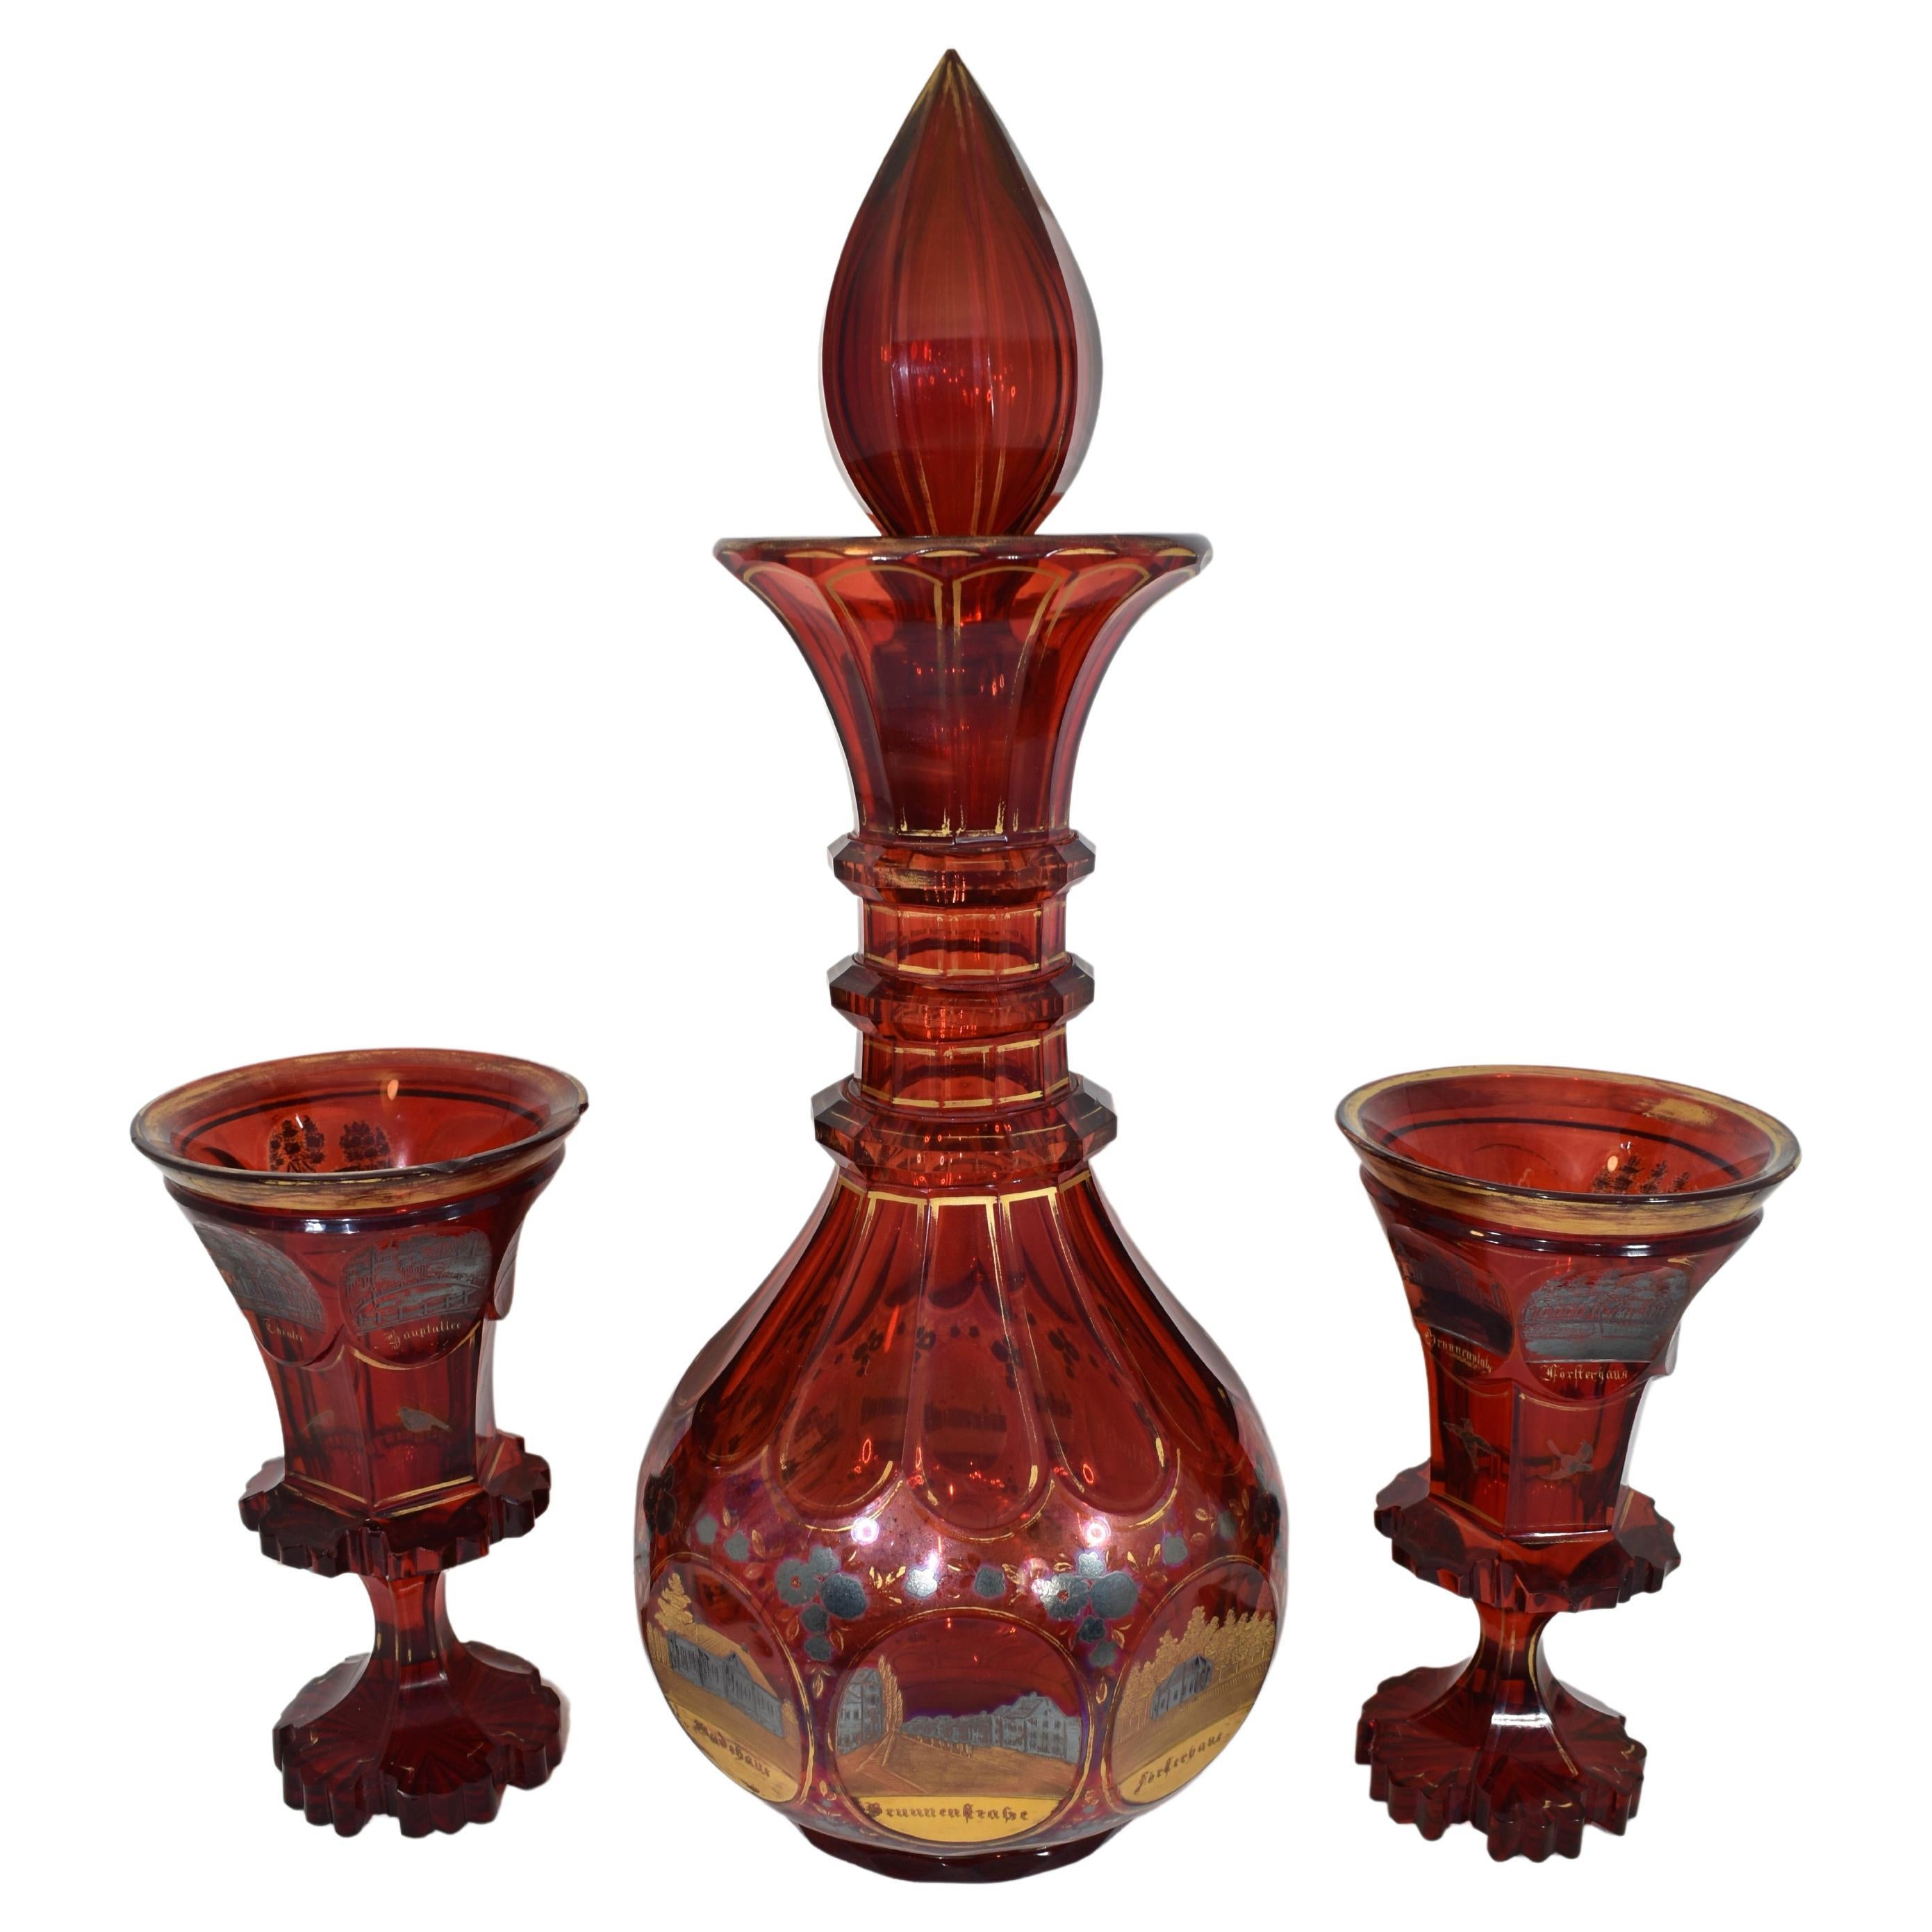 The rare set of one large decanter and a pair of goblets in deep transparent ruby red glass

decorated all around with multiple engraved scenes, silver enamel and gilding highlights

deceanter neckis applied with three rings

the goblets with